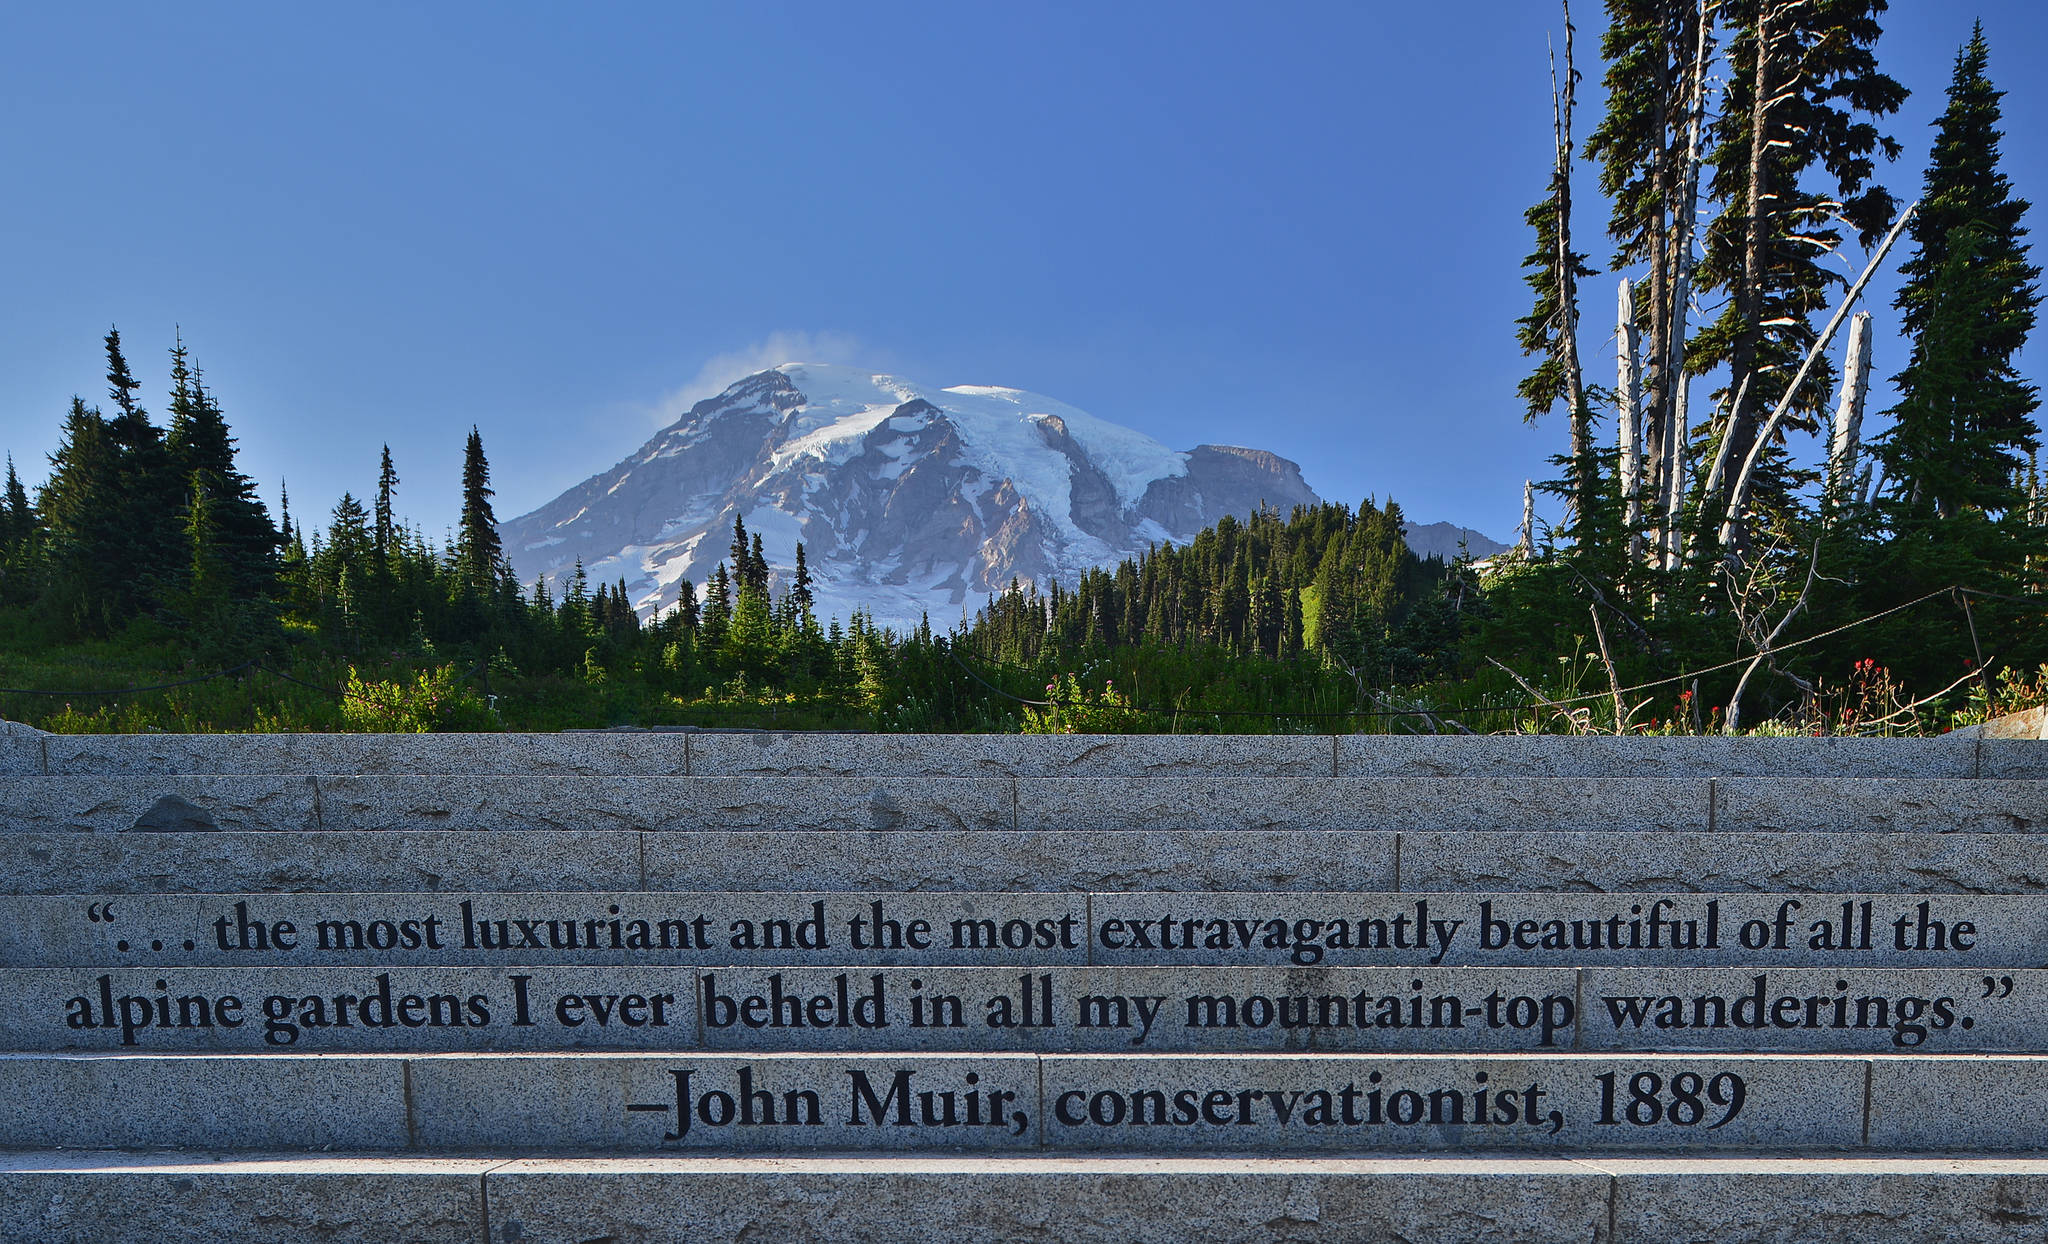 This Aug. 17, 2016 photo provided by John Chao shows the Muir Steps, Paradise area inside Mount Rainier National Park in Washington. Steps engraved with a quote from famed naturalist John Muir lead up to the Paradise area trails in the park. These are popularly referred to as the “Muir Steps.” (John Chao via AP)